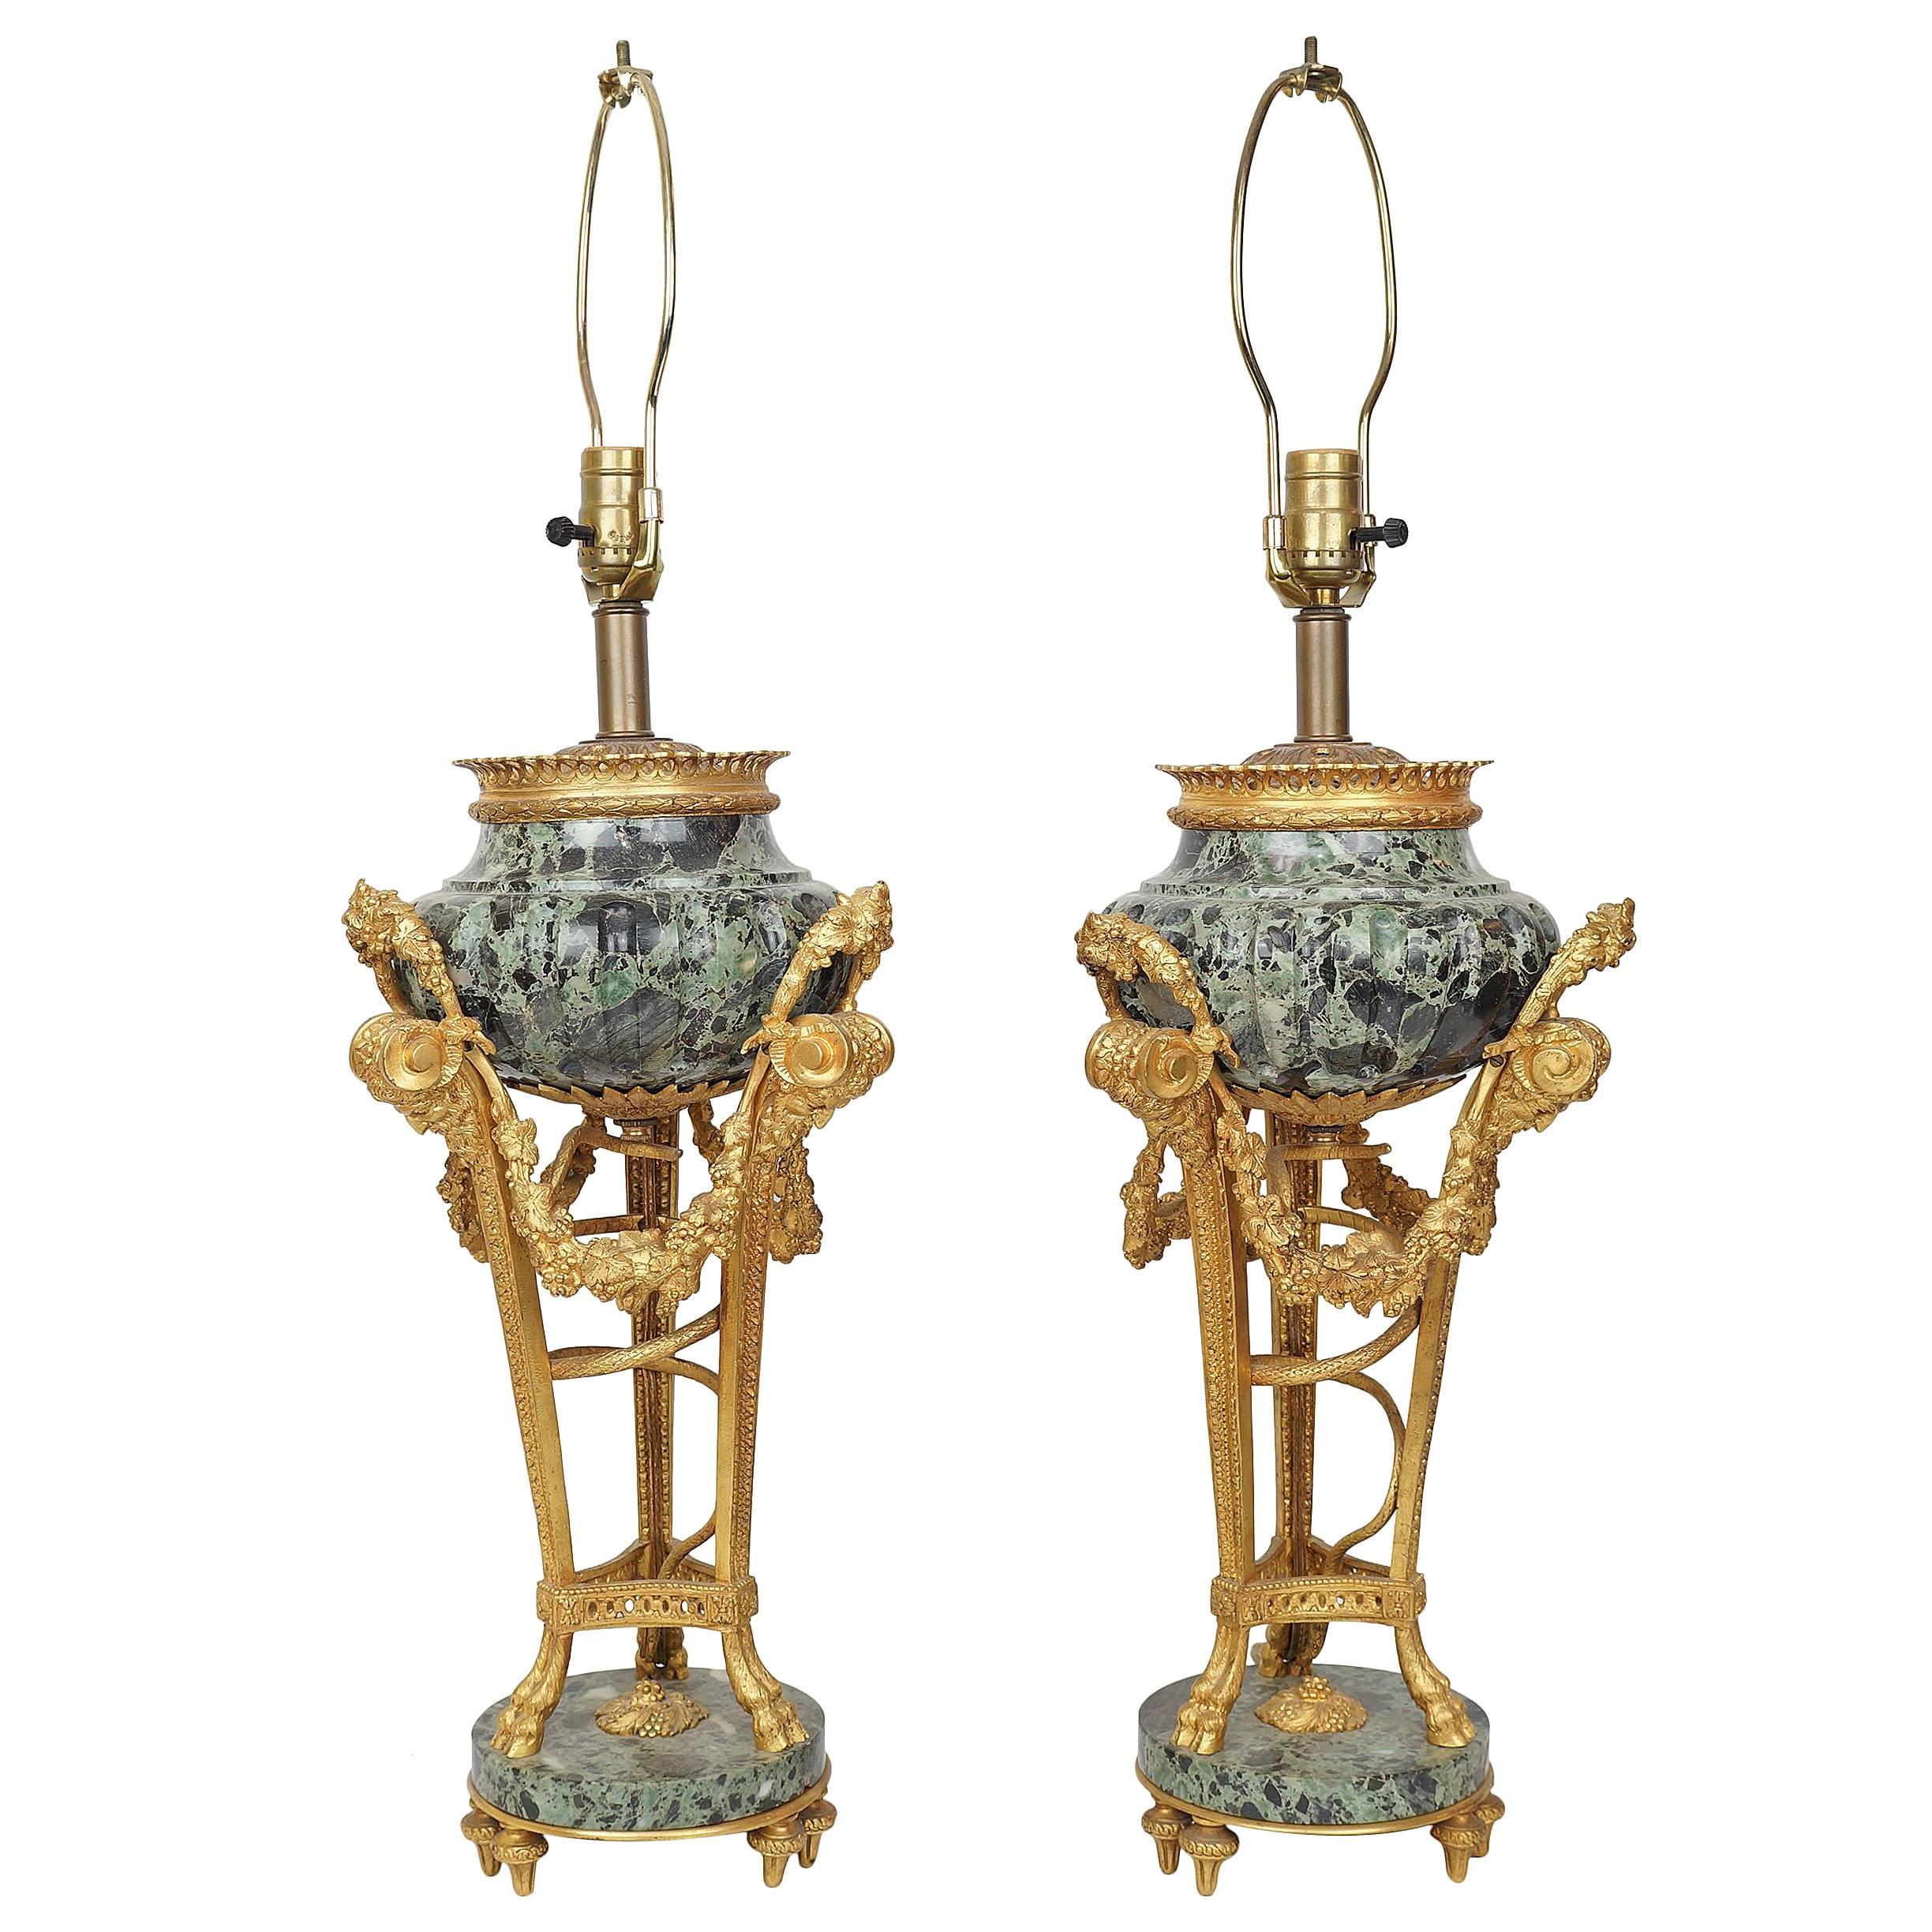 Pair of French Louis XVI Style Gilt Bronze and Marble Figural Table Lamps